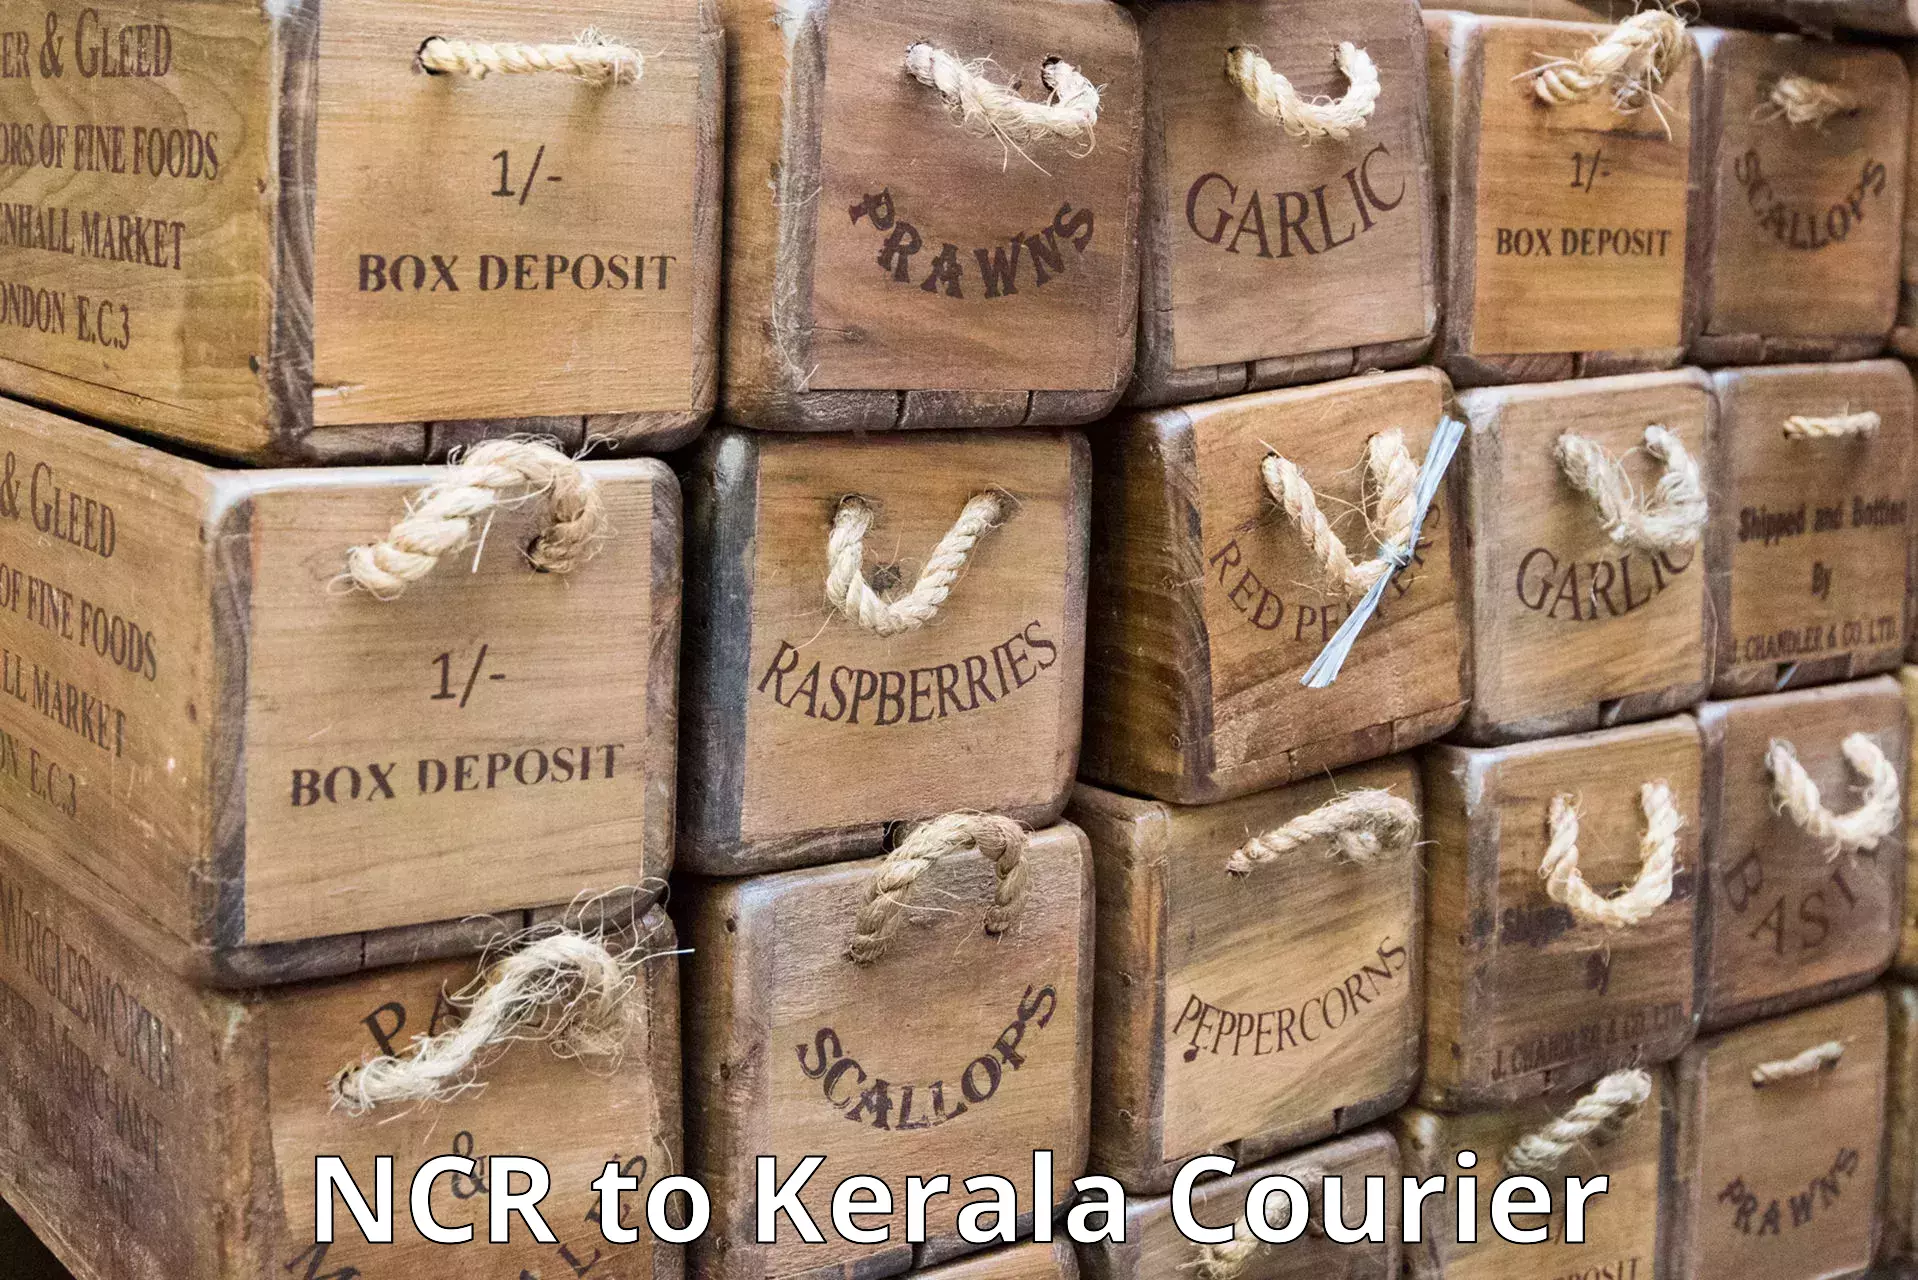 Courier tracking online NCR to Cochin Port Kochi